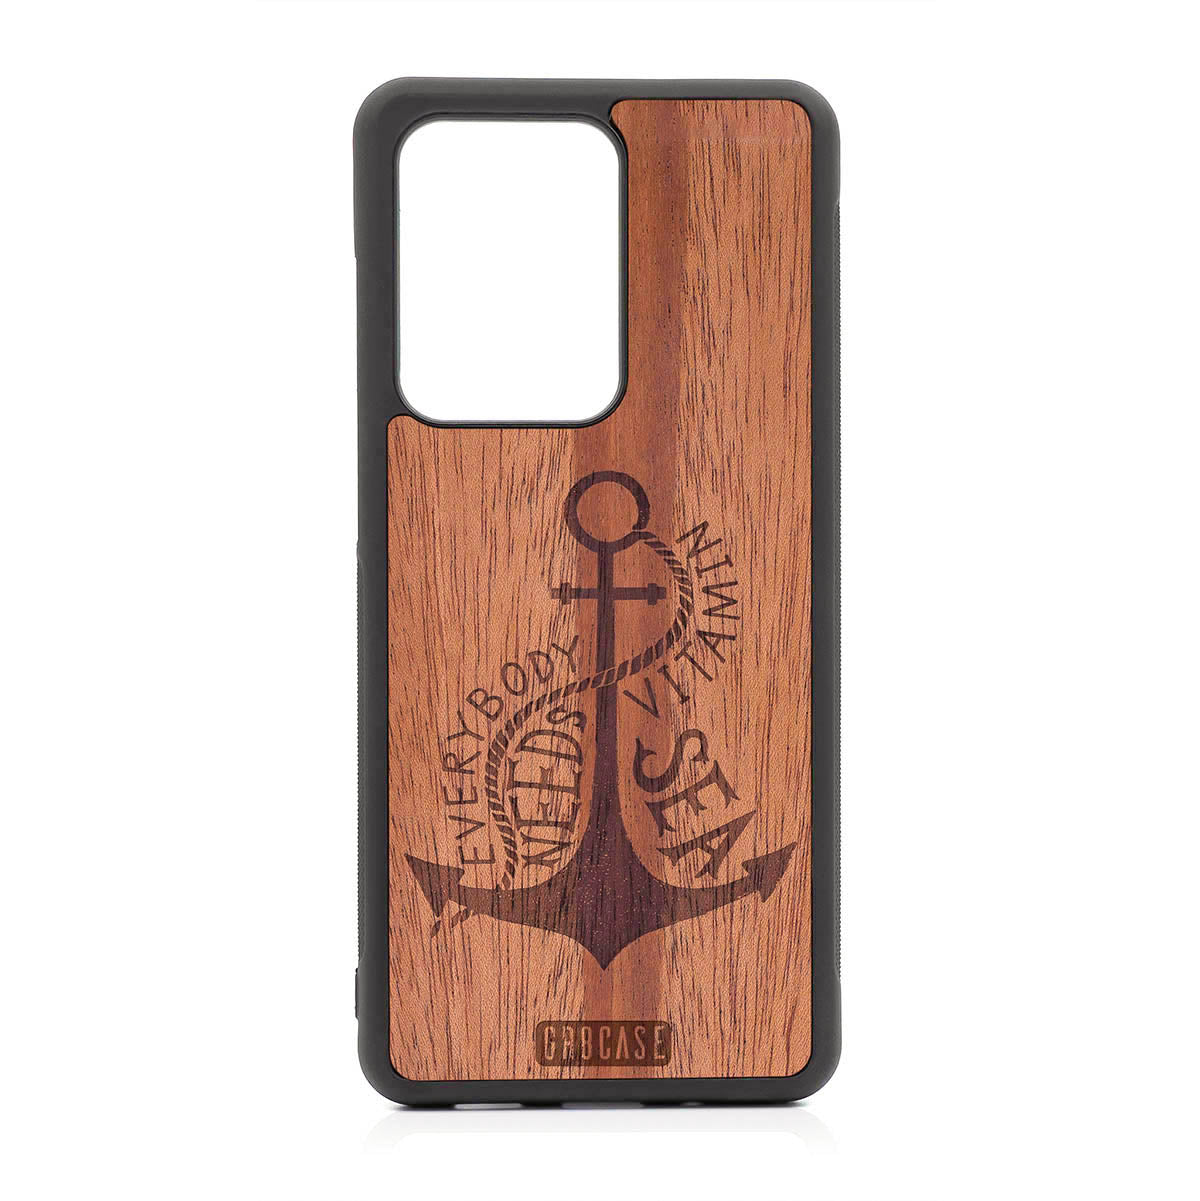 Everybody Needs Vitamin Sea (Anchor) Design Wood Case For Samsung Galaxy S20 Ultra by GR8CASE